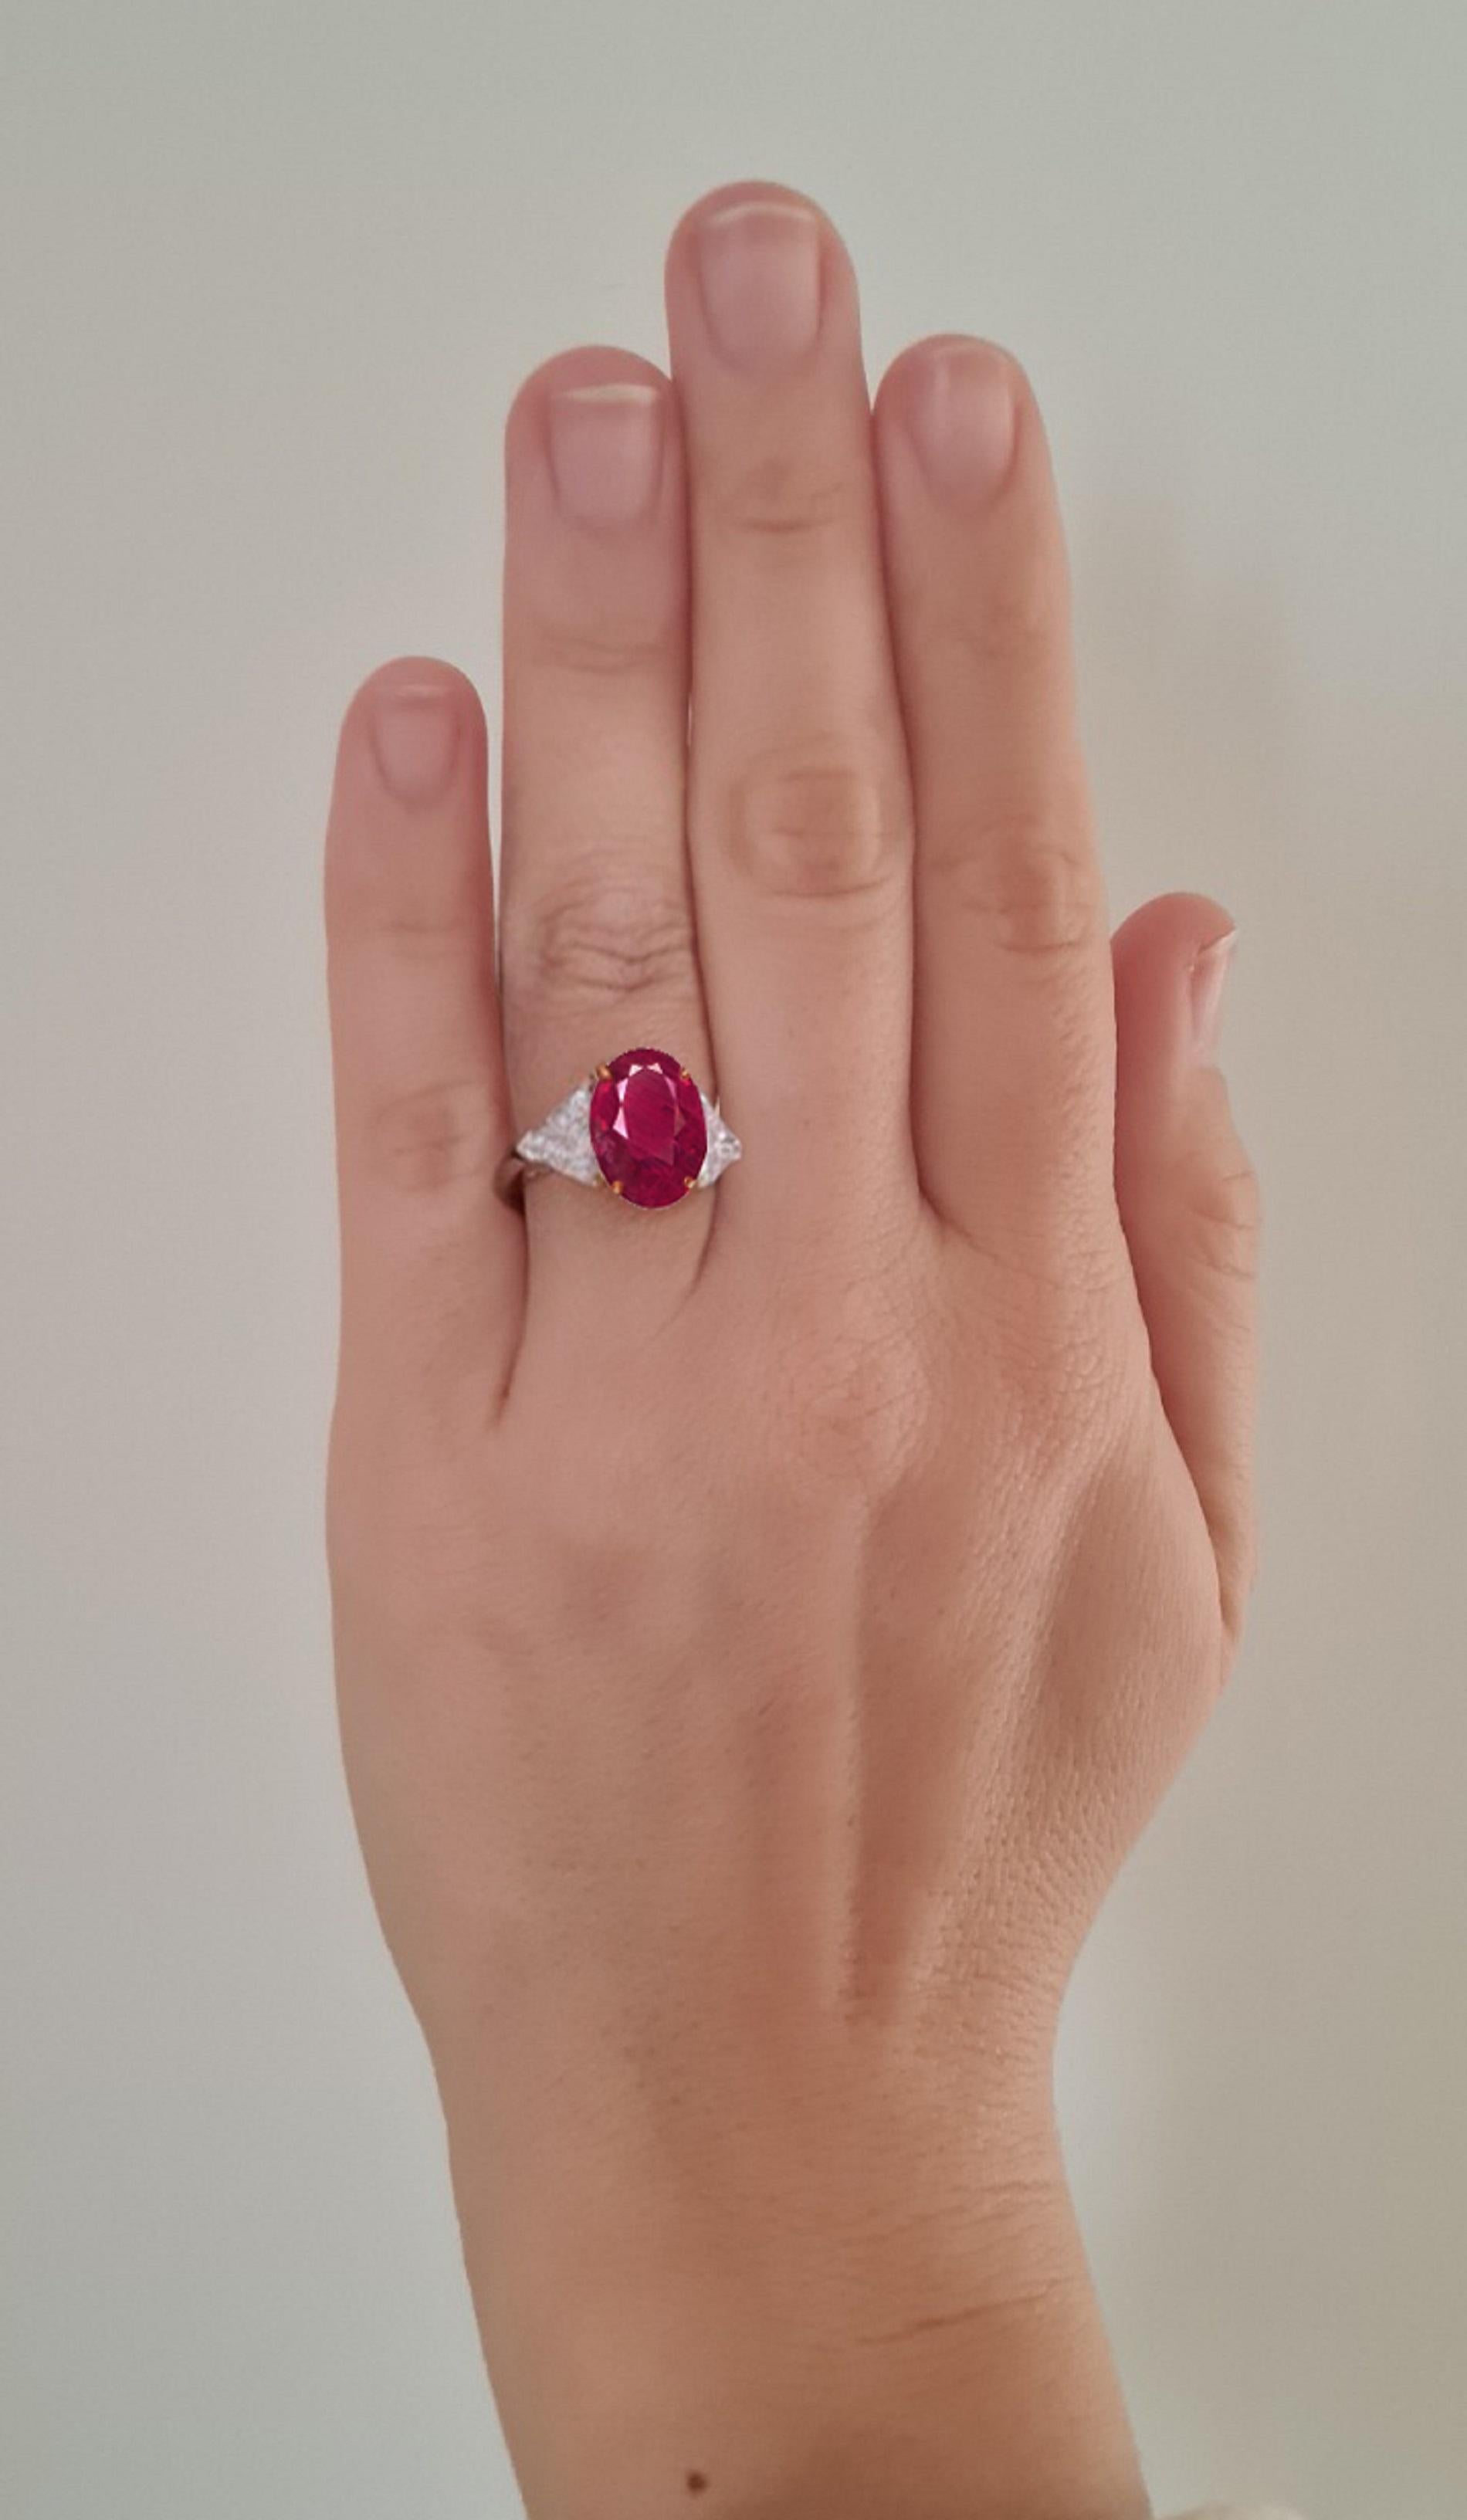 Elevate your style with this exquisite ring, a true testament to timeless beauty and exceptional craftsmanship. At its heart lies a resplendent 4.50-carat oval Burma ruby, a gem of rare allure and intense vibrancy. The rich red hue of the ruby is a